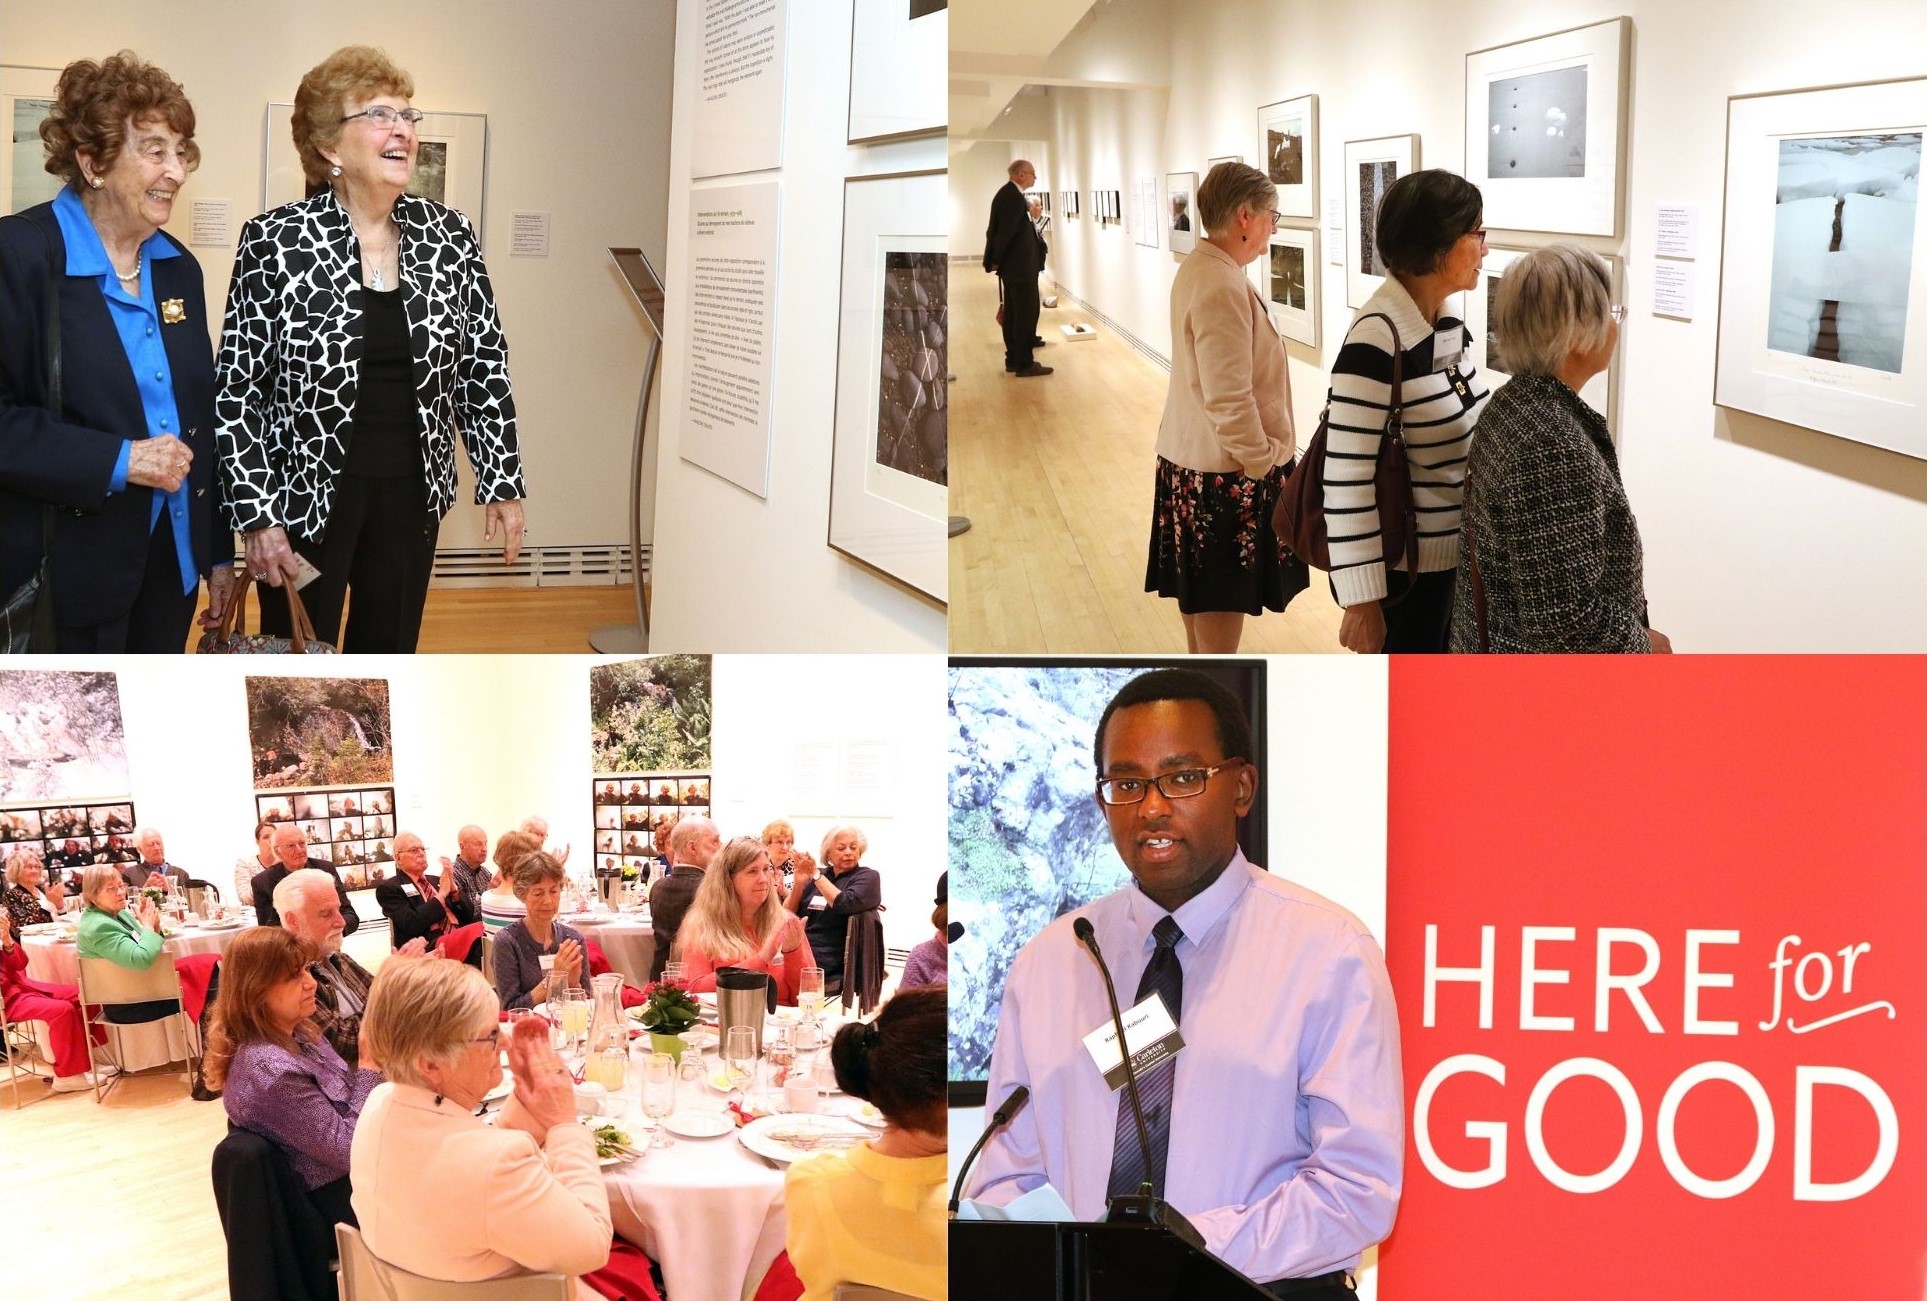 Carleton's Community Of Legacy Donor Luncheon And Exclusive Carleton University Art Gallery Tour June 3, 2019. Guests Enjoyed A Lovely Lunch And Explored The Gallery, As Well As Its Featured Exhibits, Marlene Creates: Places, Paths, and Pauses And On Location: Human Interventions In The Landscape. Welcoming Remarks Were Provided By Dr. Benoit-Antoine Bacon, Carleton University's Former President and Vice-Chancellor. Raphael Kabuuri, A Third-Year Student In Aerospace Engineering, Then Shared His Story About The Impact Of Donor Support.